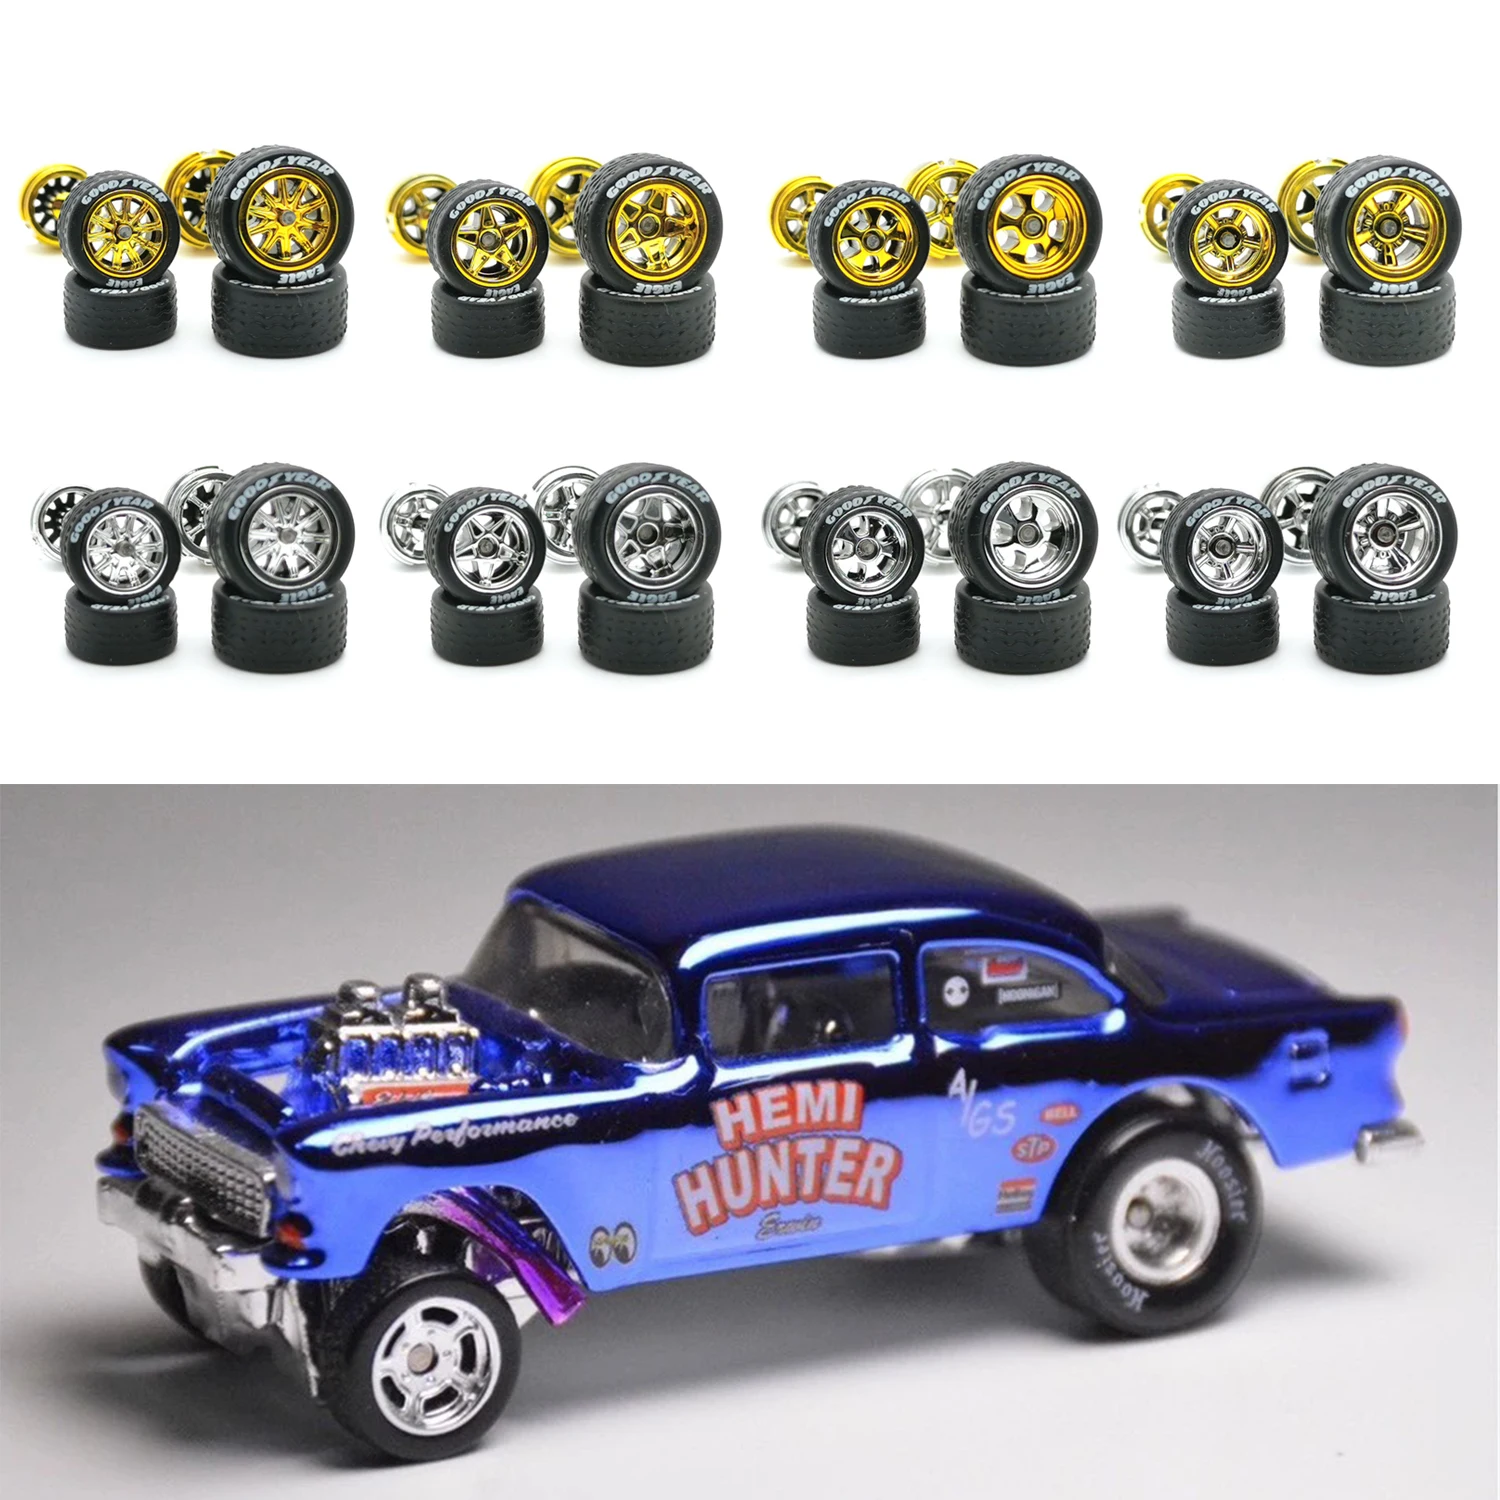 1set11mm wheels for 1/64 Scale Alloy Car Models 1/64 wheels with Tires + Axles Cars Upgrade for Matchbox/Domeka/Minigt